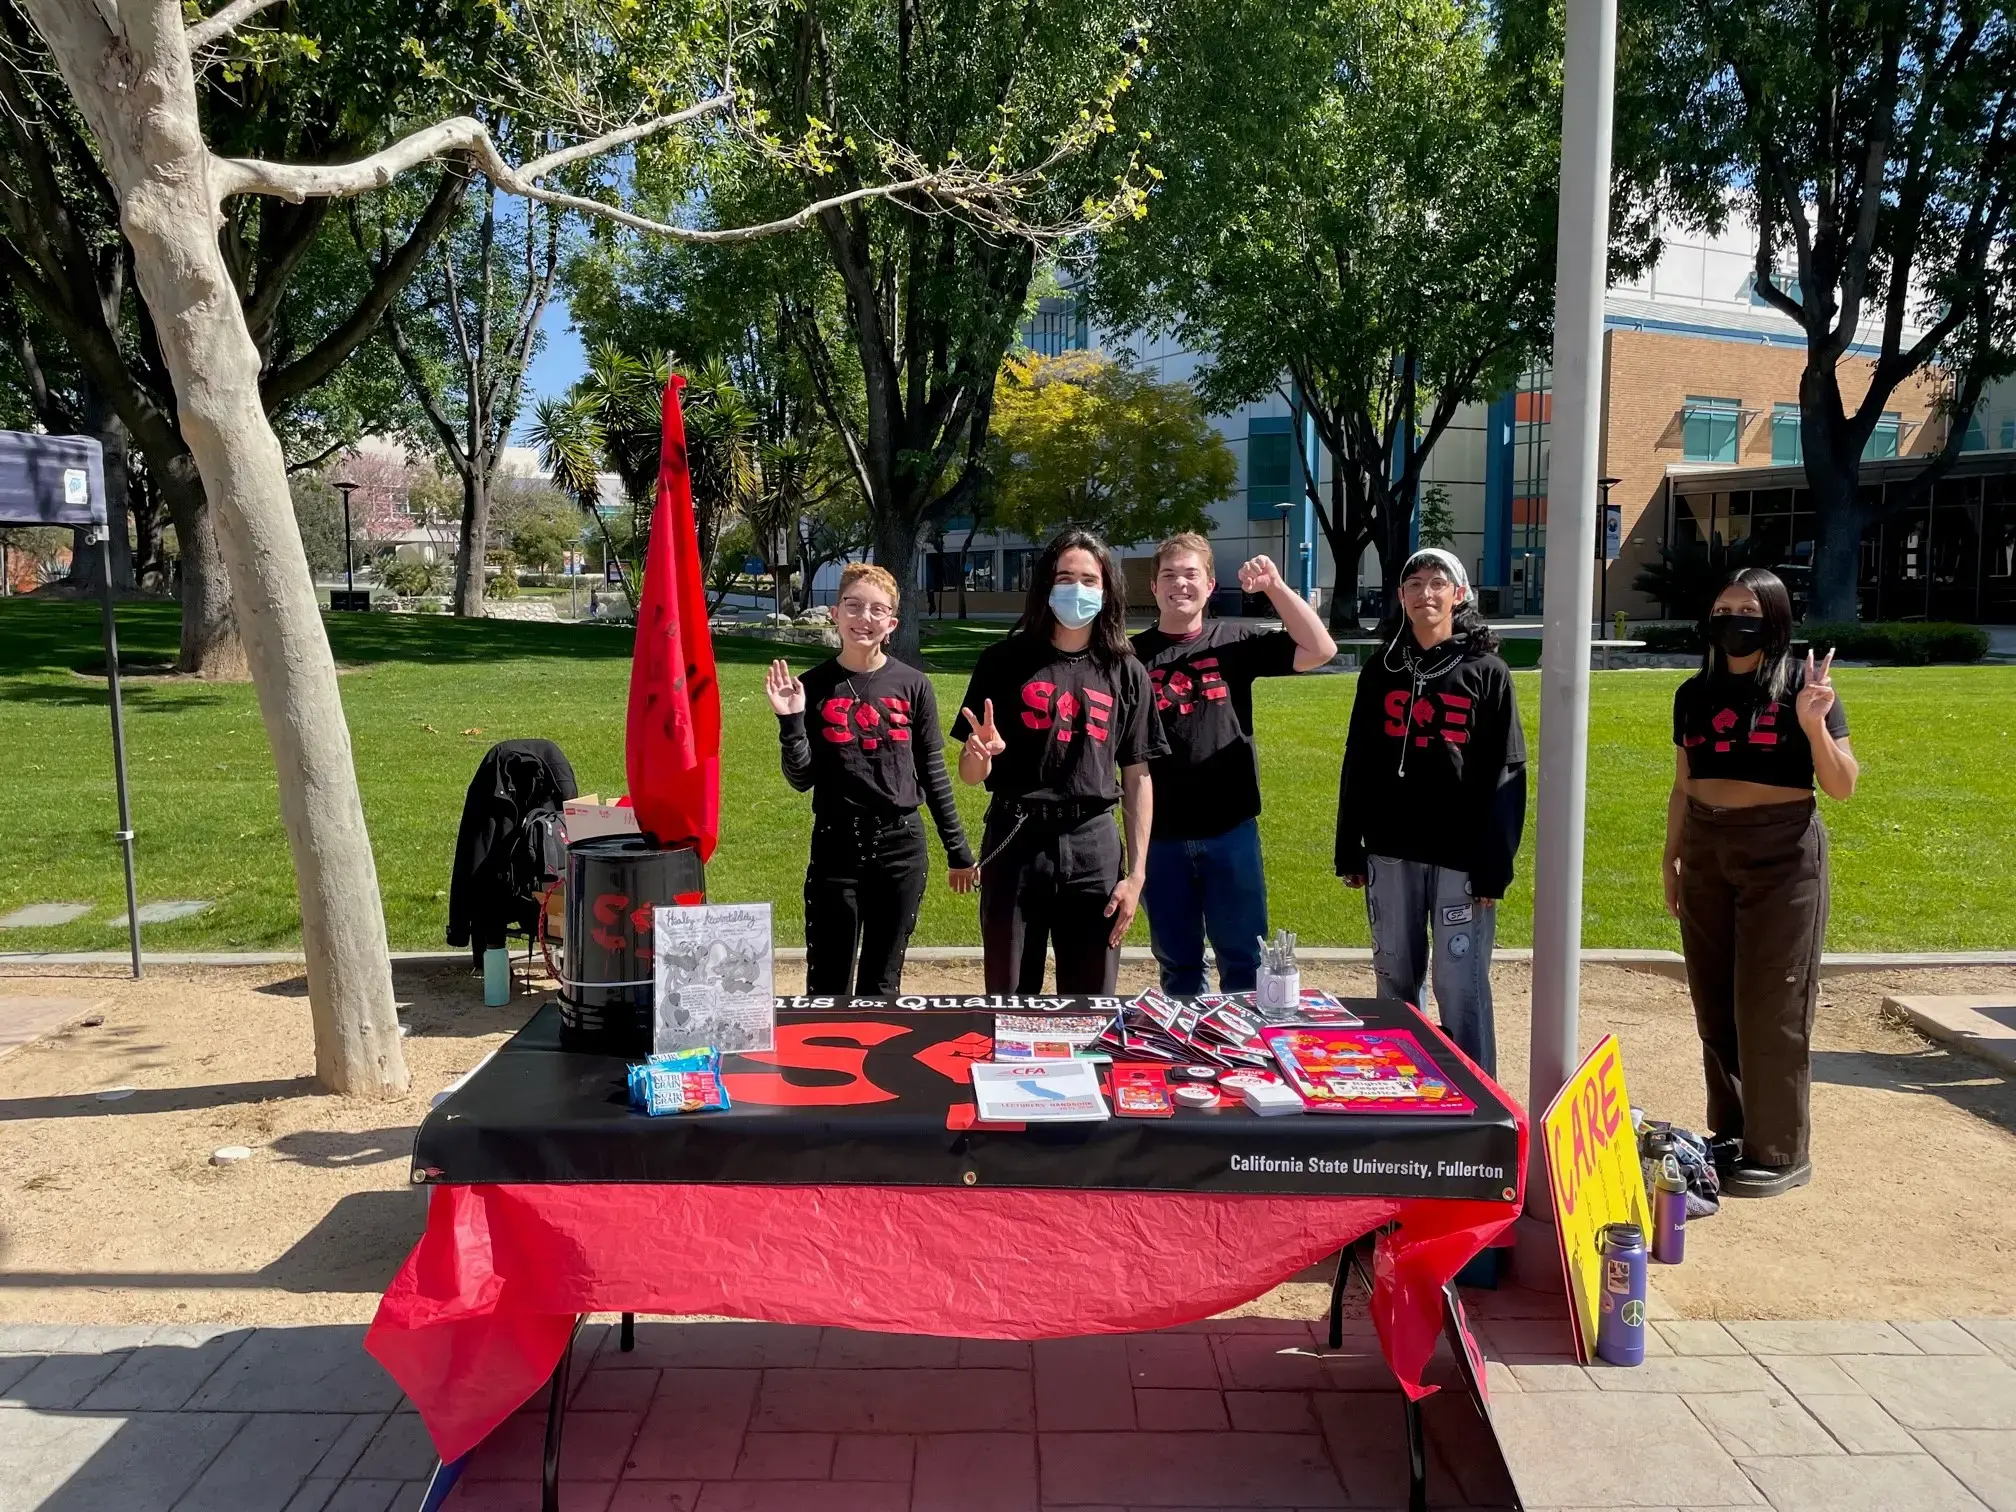 Students in SQE shirts outdoors tabling at a campus.